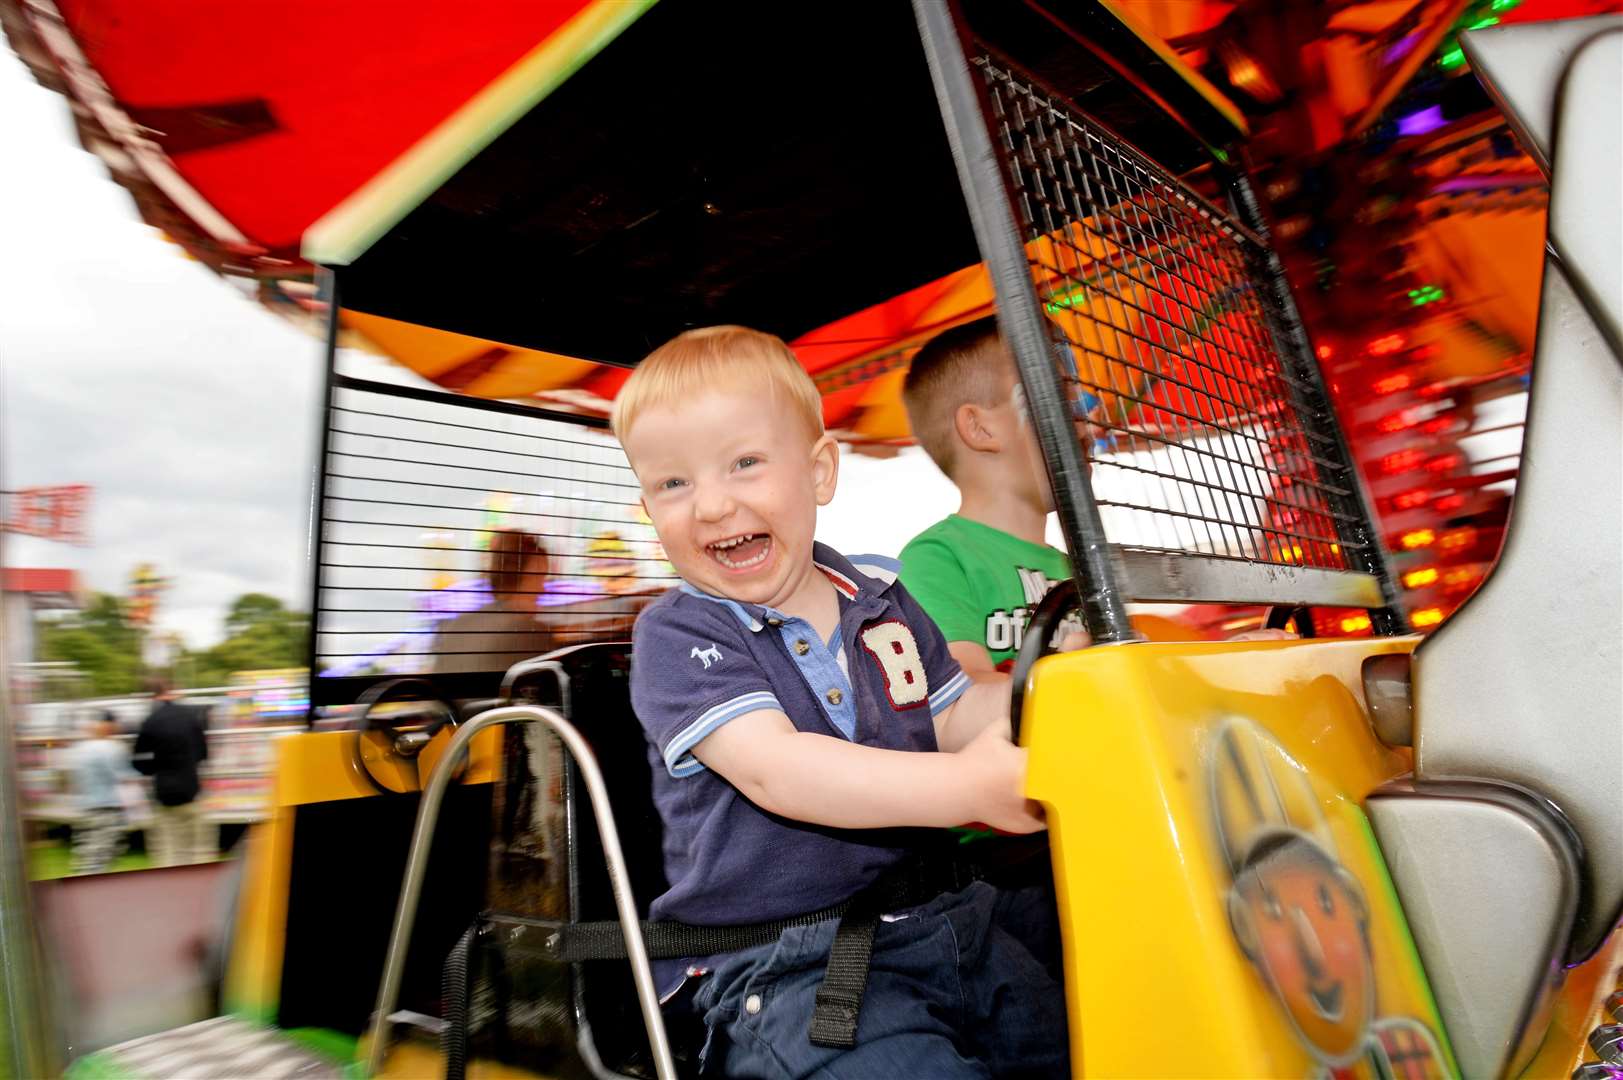 Having a fair amount of fun was one year old Corran McNeill from Munlochy. Picture: Gair Fraser.